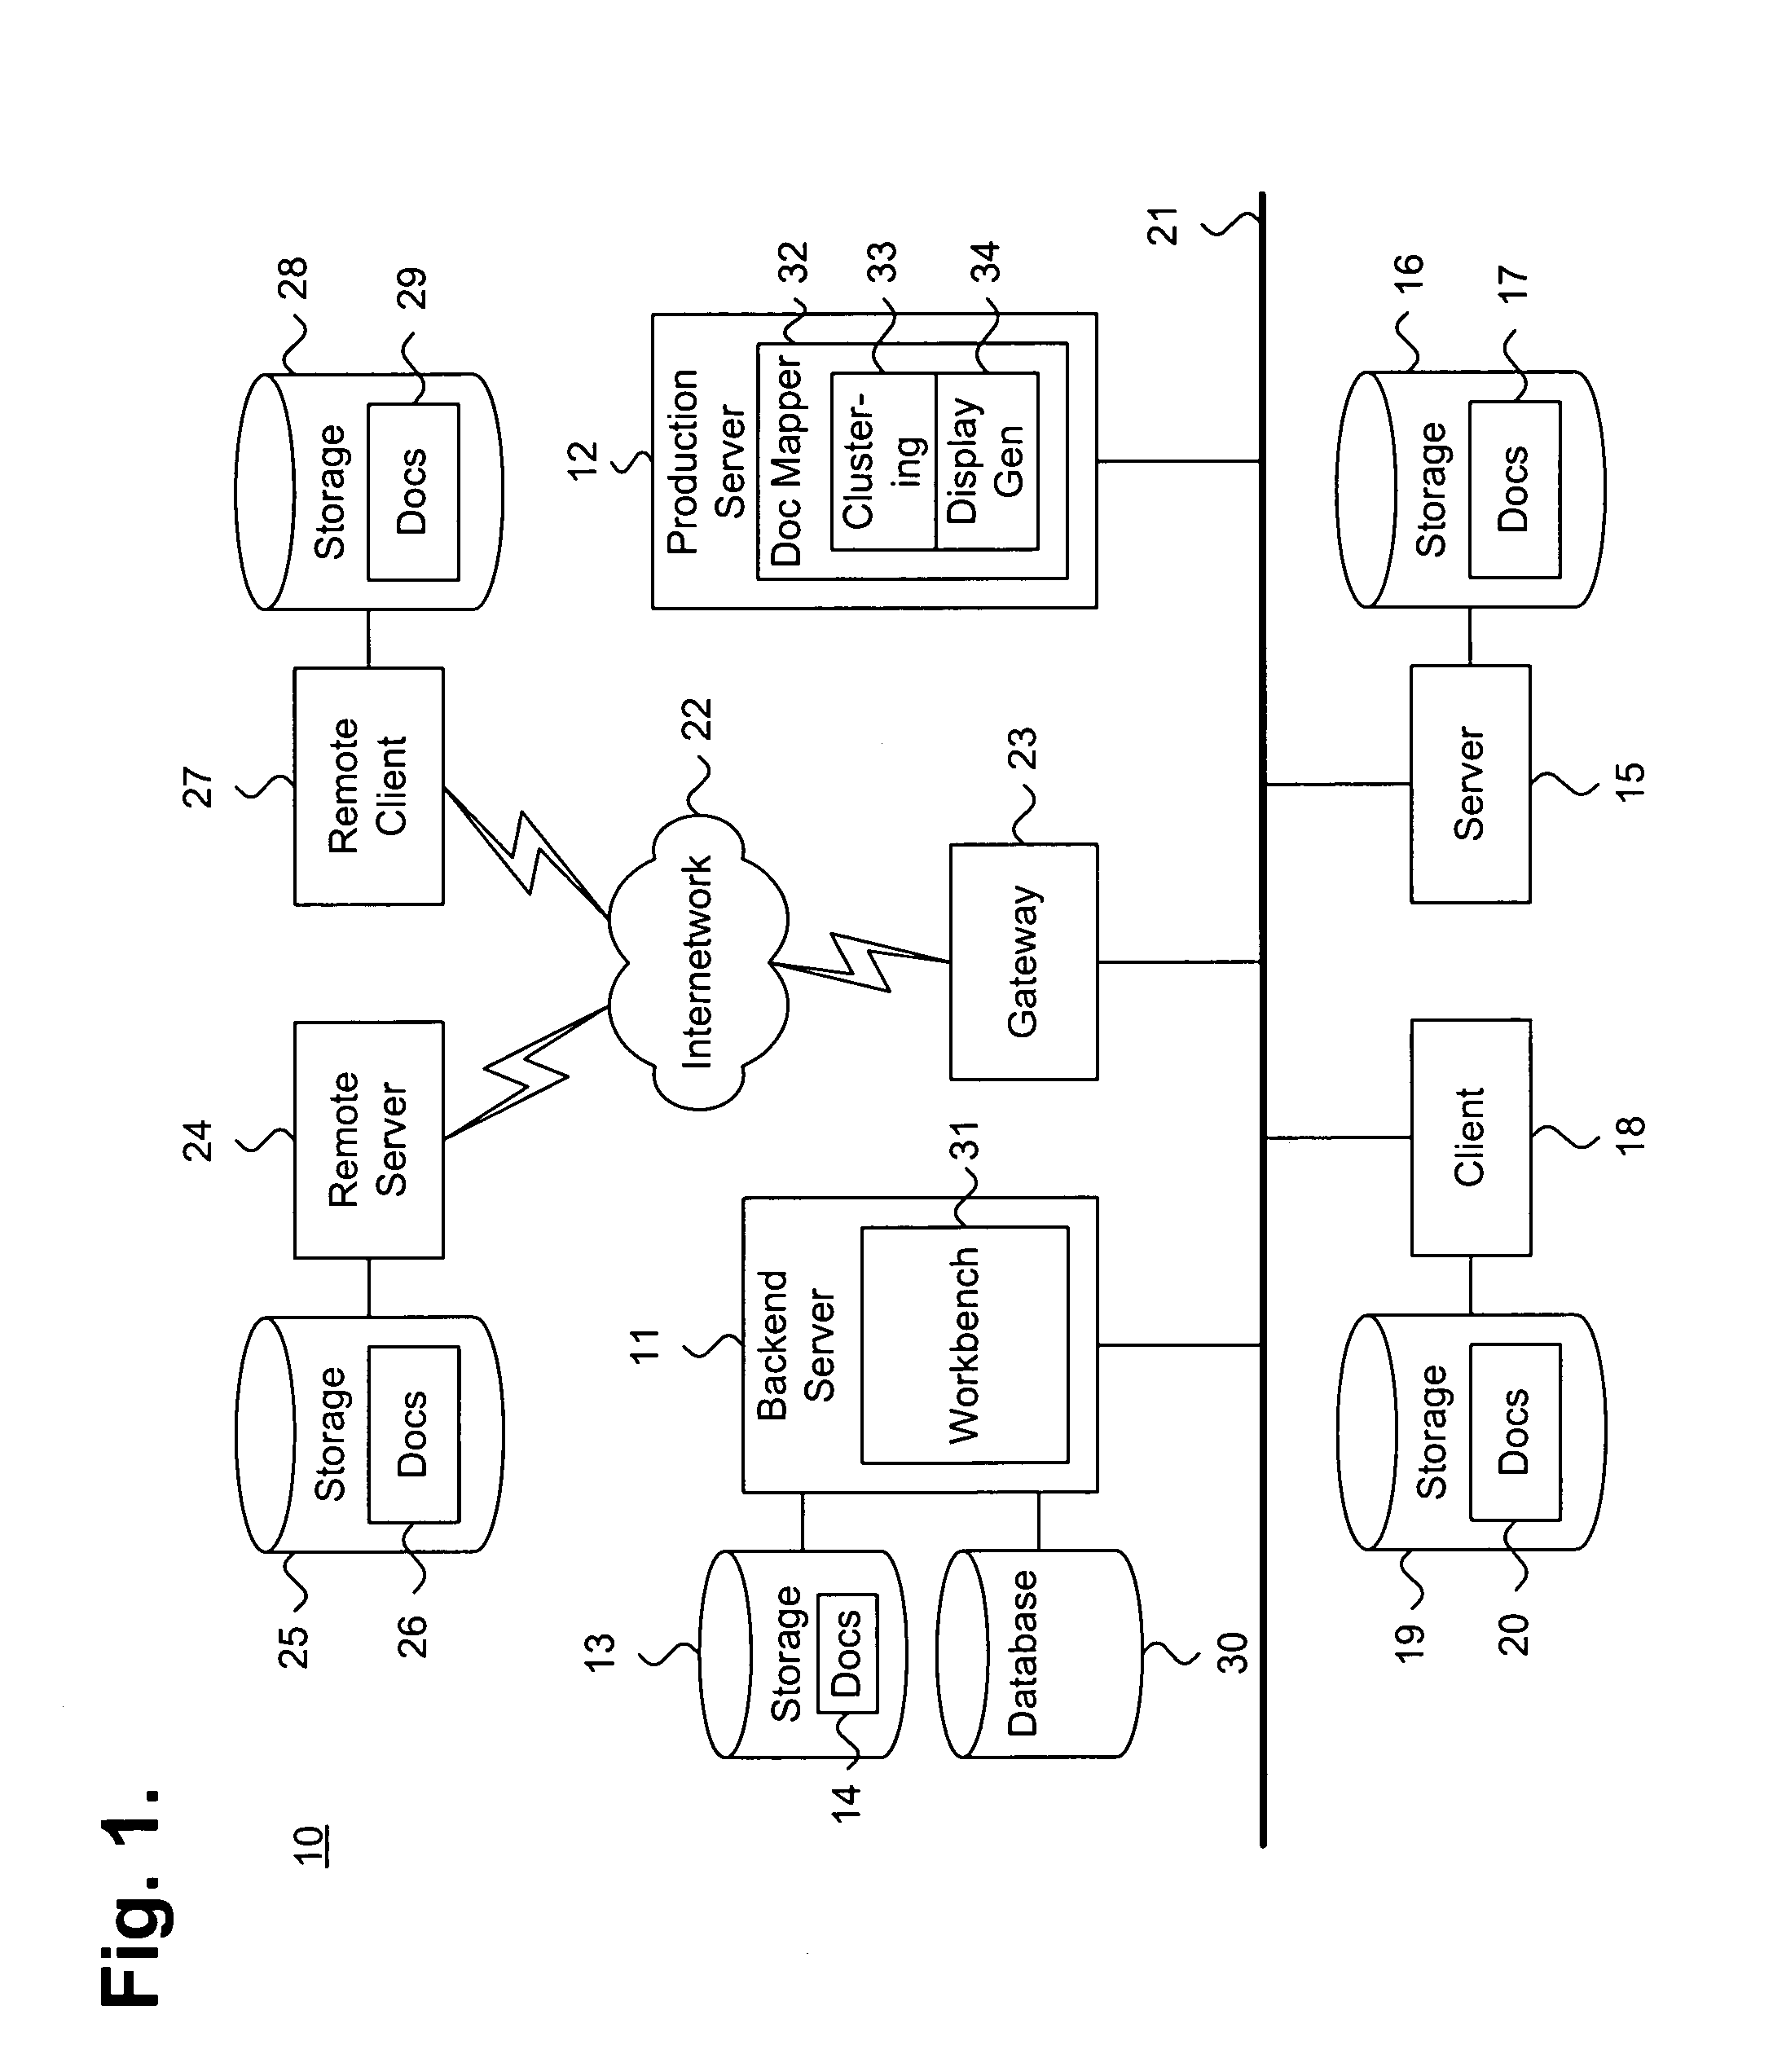 System and method for arranging concept clusters in thematic neighborhood relationships in a two-dimensional visual display space